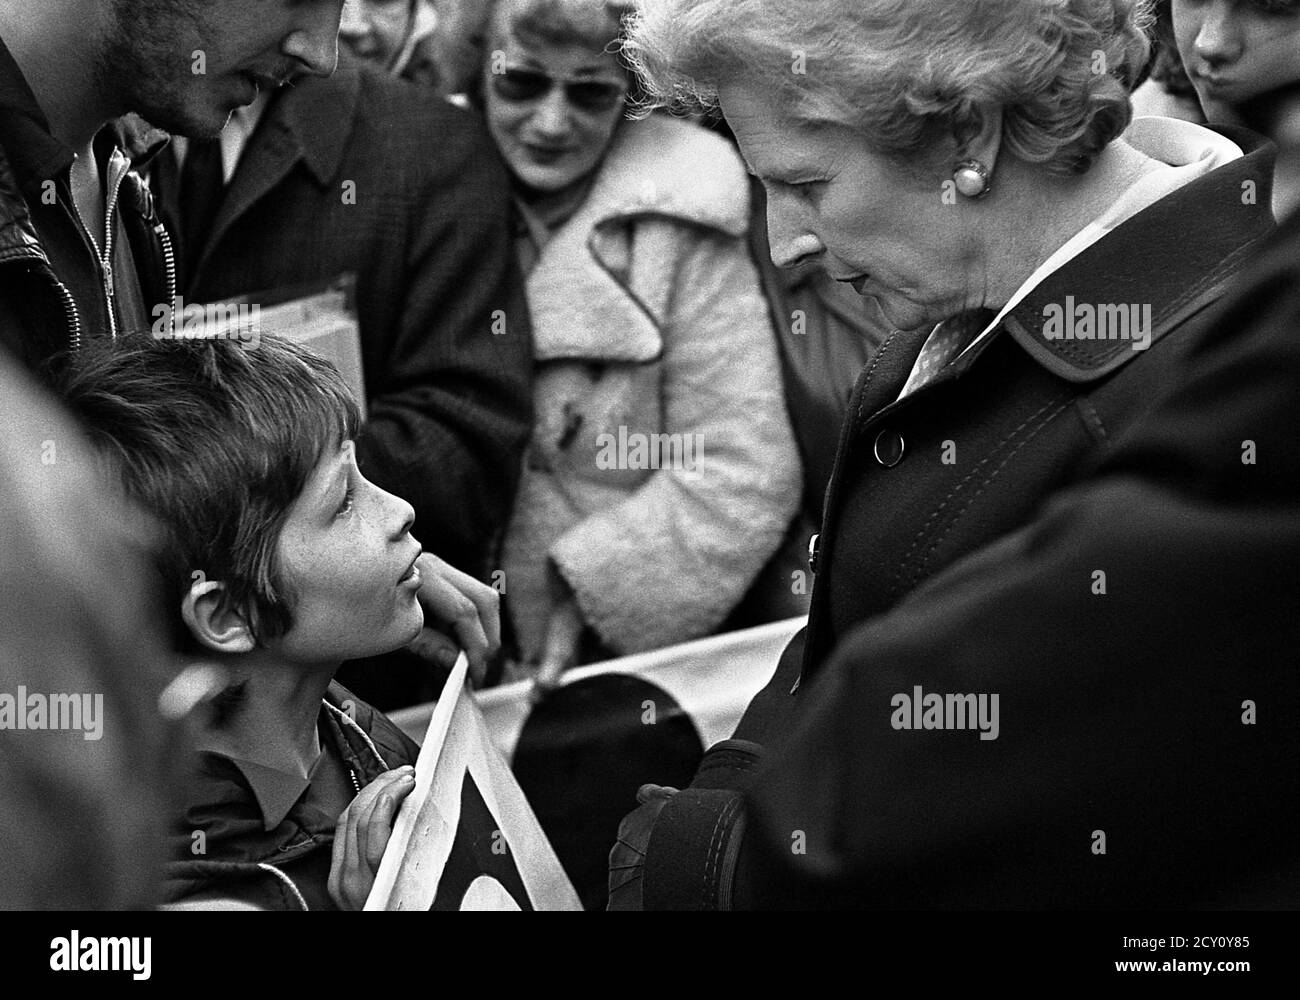 AJAXNETPHOTO.11TH FEBRUARY,1977. PORTSMOUTH, ENGLAND.  - CITY WALKABOUT - MRS MARGARET THATCHER (CON), LEADER OF THE OPPOSITION, CHATS WITH 11 YEAR OLD TONY VENN FOM PORTSEA WHILE MEETING THE PUBLIC IN COMMERCIAL ROAD SHOPPING PRECINCT DURING A CAMPAIGN WALKABOUT. PHOTO:JONATHAN EASTLAND/AJAX REF:3771102 43 Stock Photo